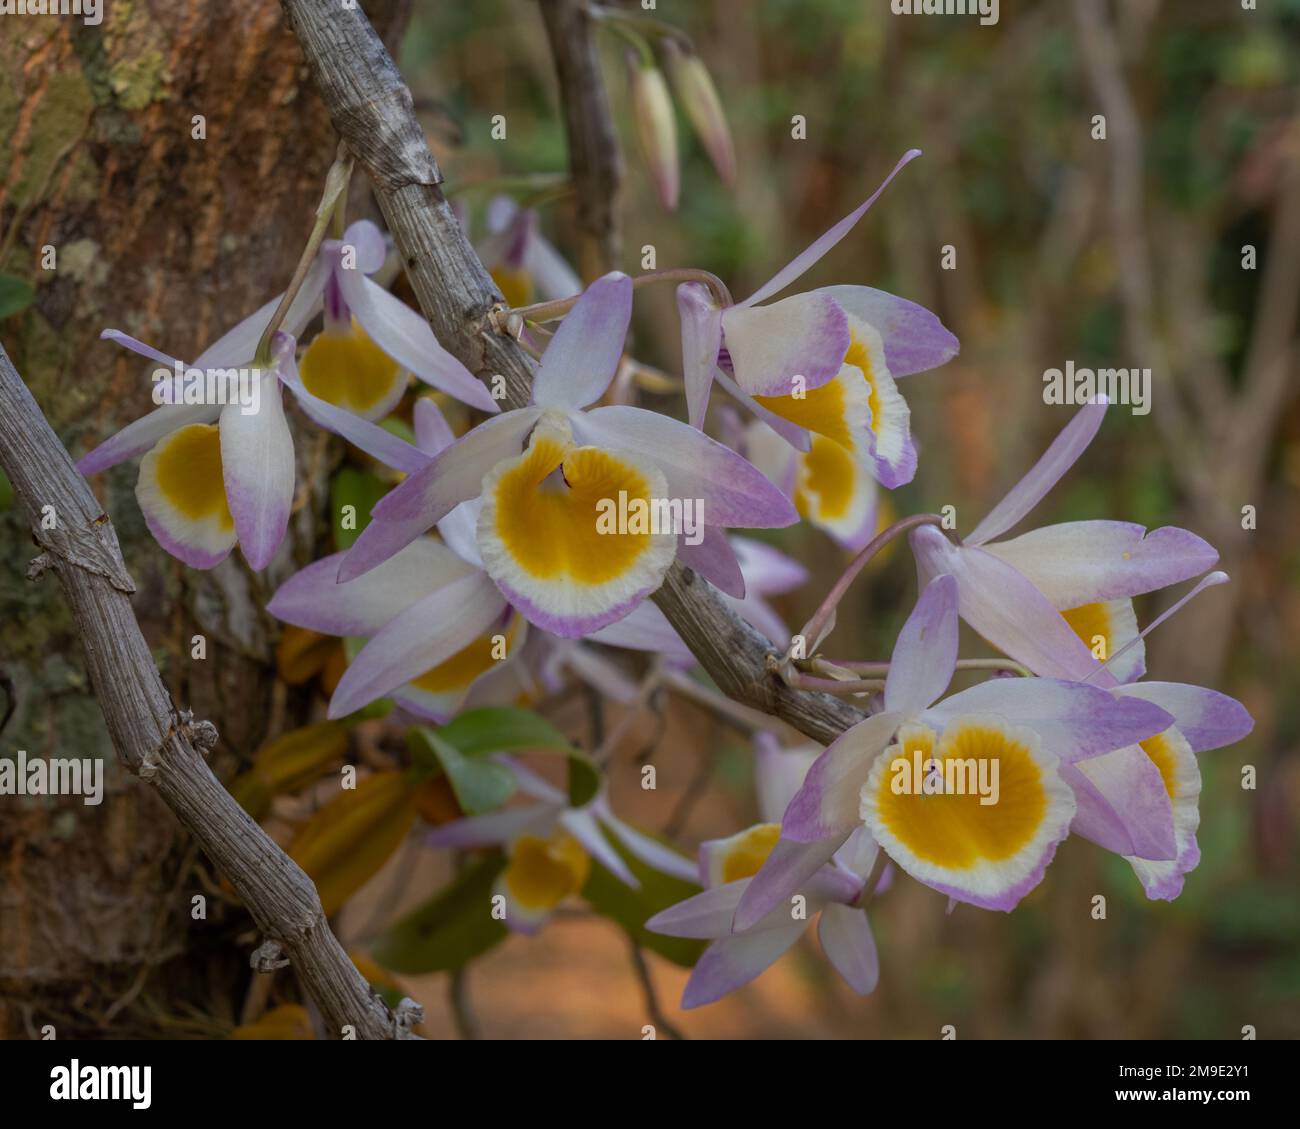 Colorful yellow purple and white flowers of dendrobium crystallinum tropical epiphytic orchid species on natural garden background Stock Photo